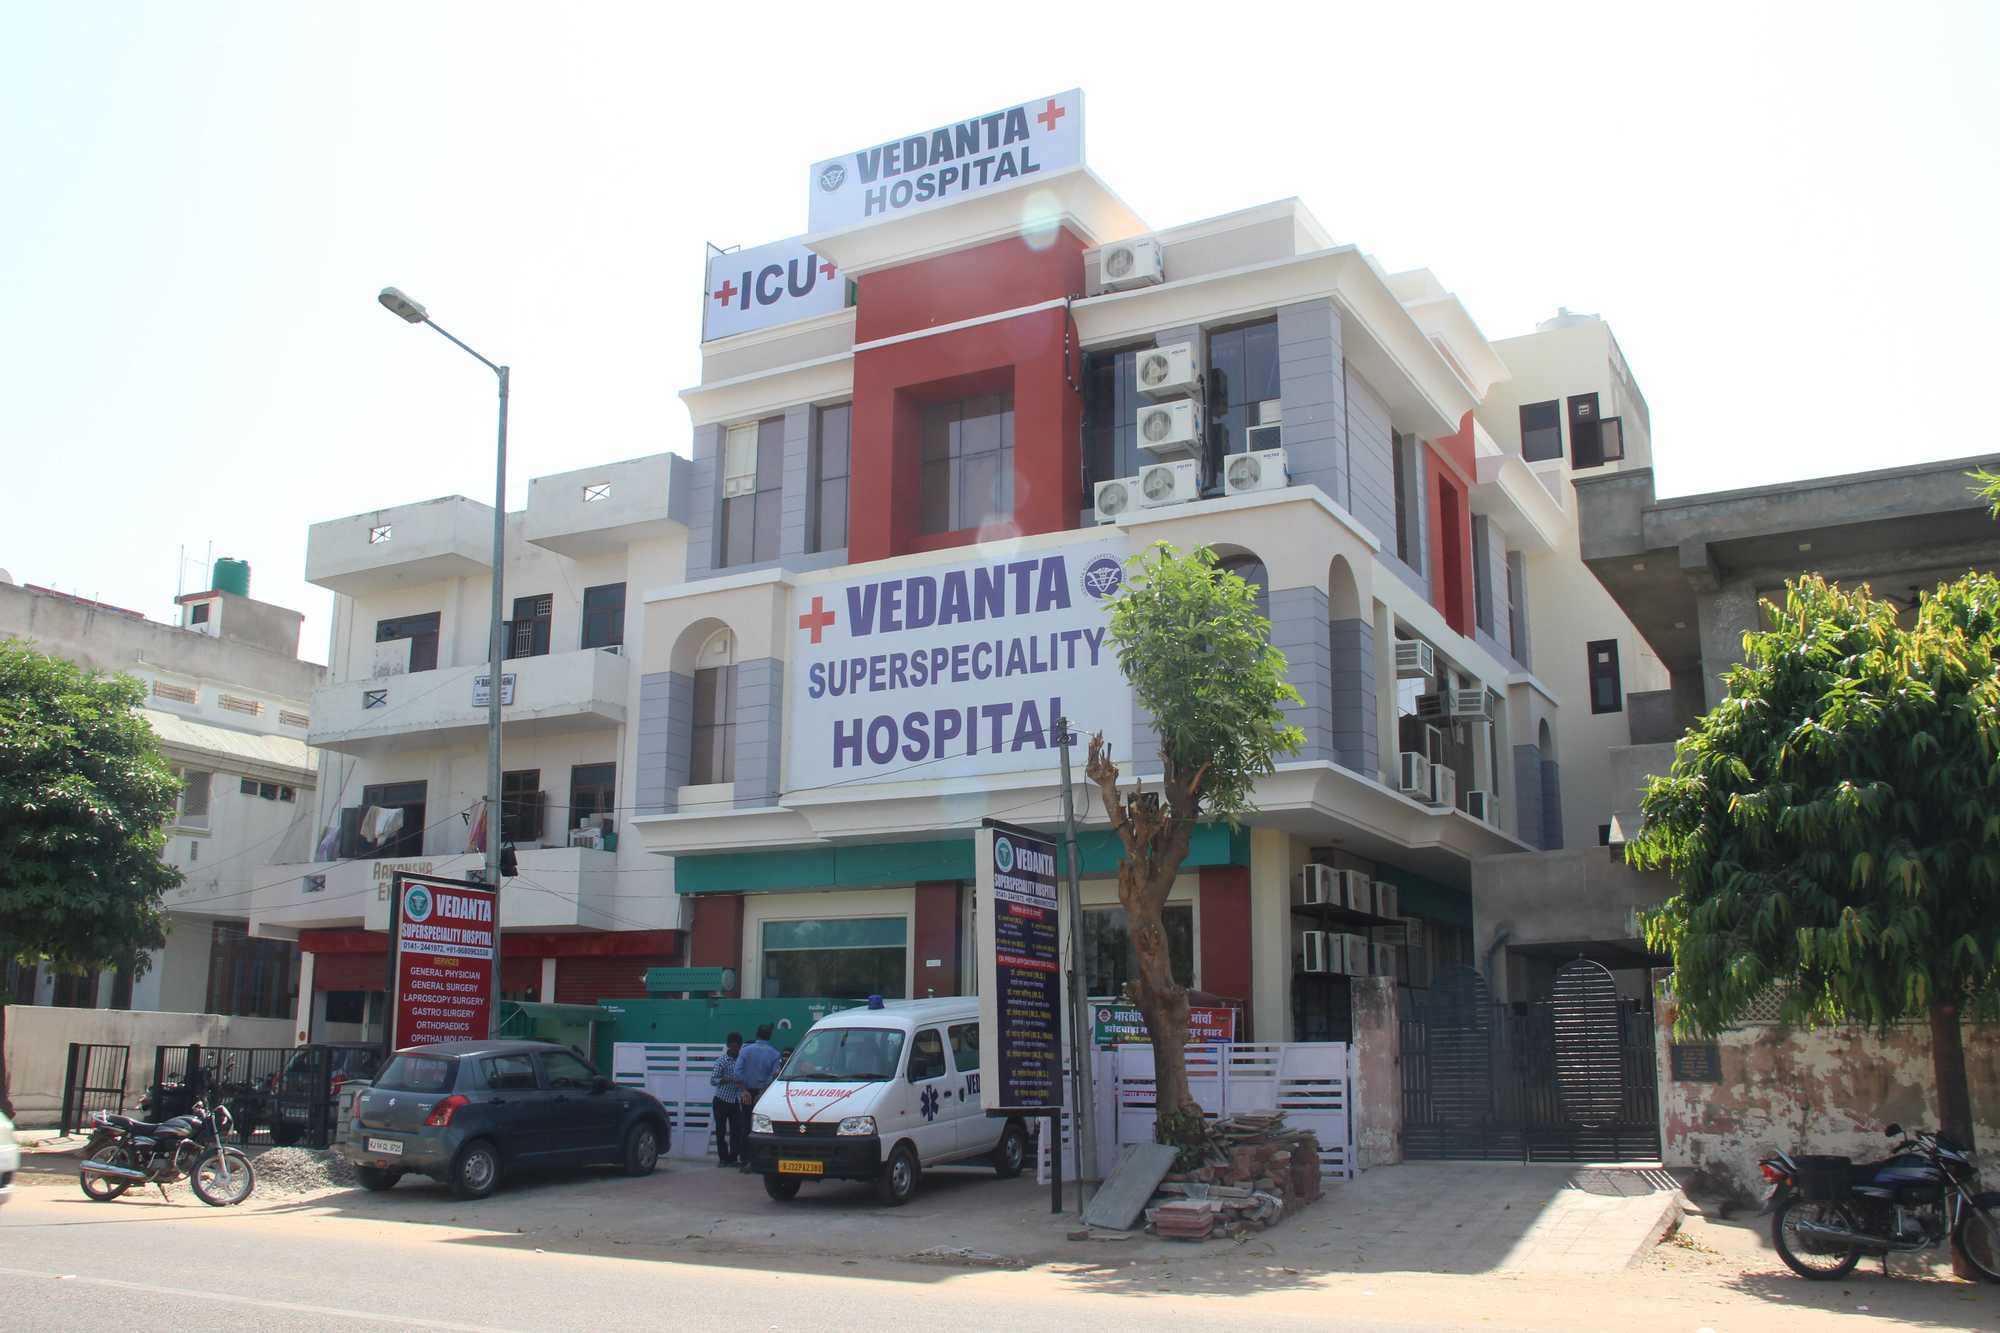 Vedanta Superspeciality Hospital from Vedanta Superspeciality Hospital, Vaishali Nagar, Jaipur B 2/21, Gandhi Path, Vaishali Nagar ,Jaipur ,Rajasthan, India | Kayawell